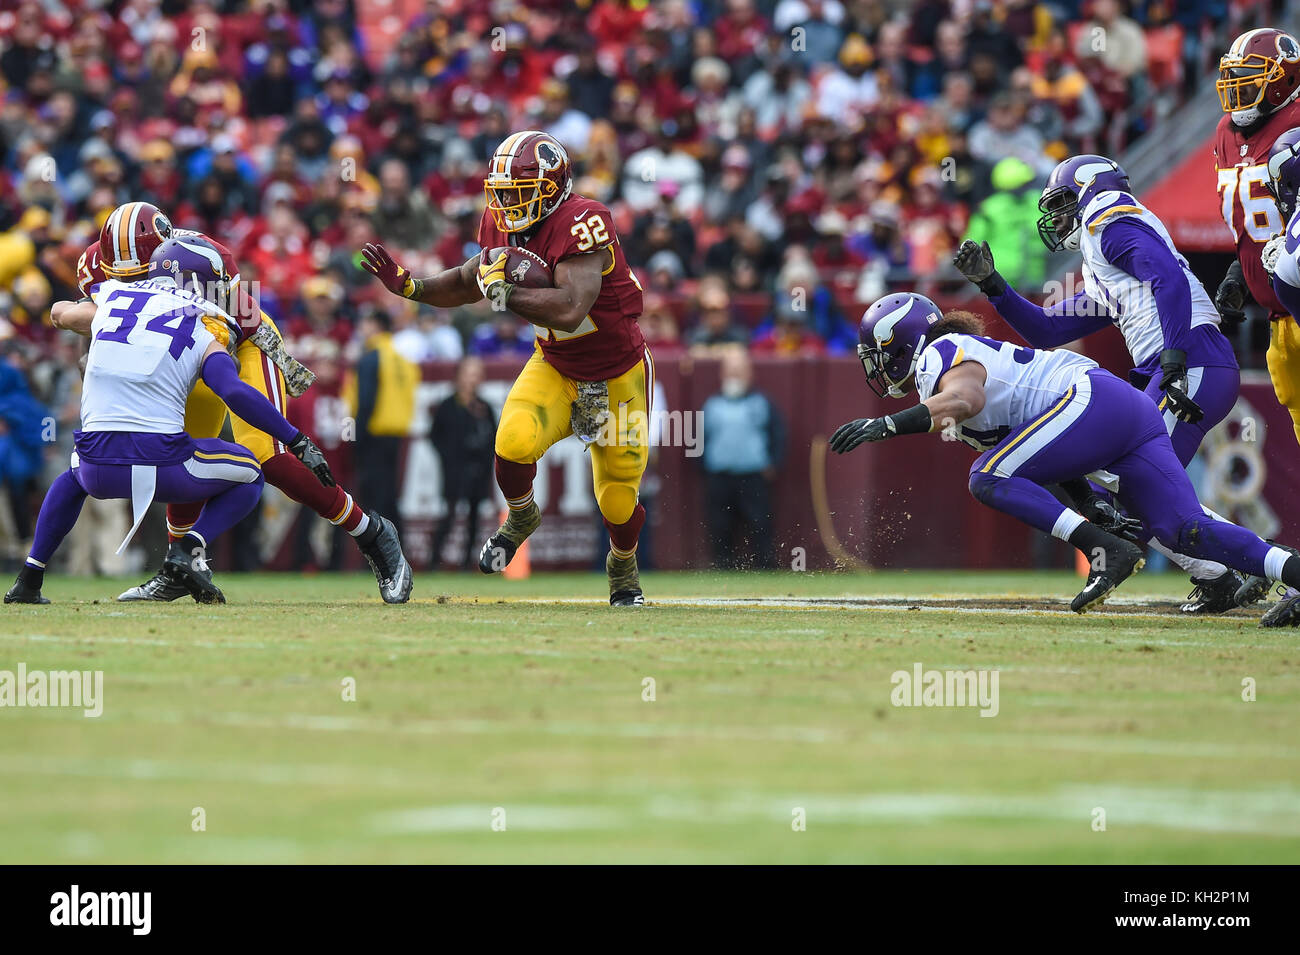 Landover, MD, USA. 12th Nov, 2017. Washington Redskins running back Samaje Perine (32) hits an open hole with the ball during the matchup between the Minnesota Vikings and the Washington Redskins at FedEx Field in Landover, MD. Credit: csm/Alamy Live News Stock Photo